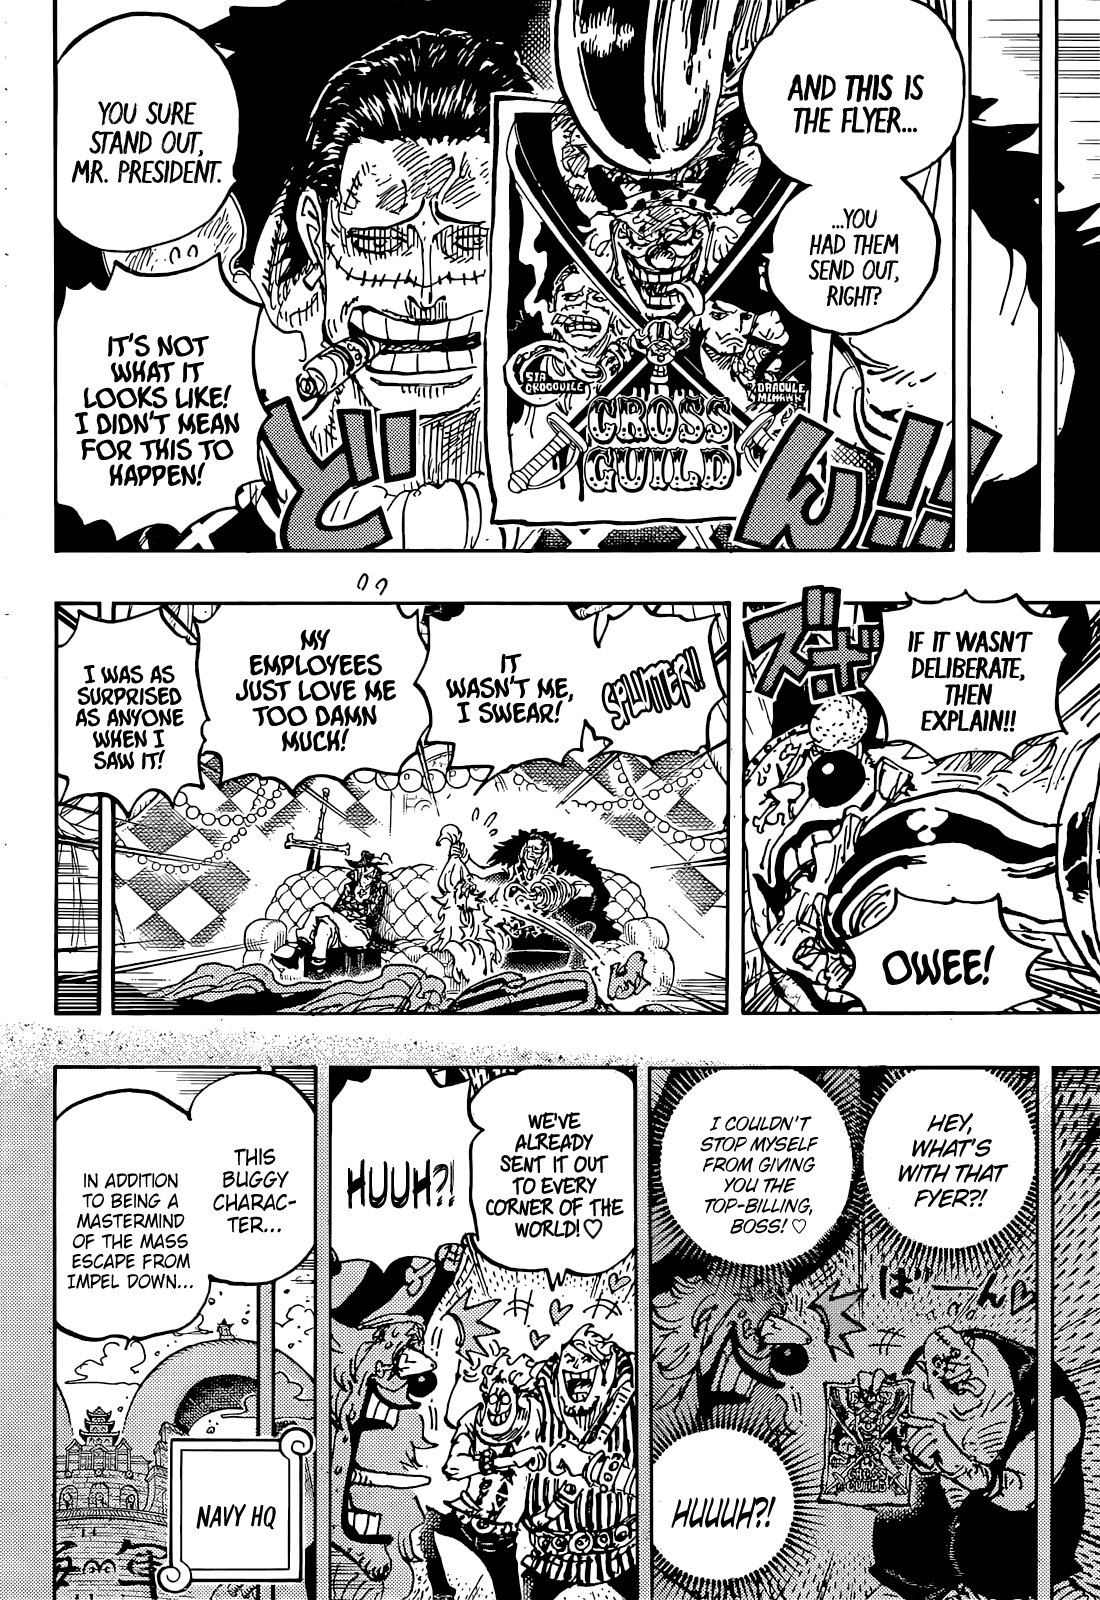 One Piece 1058, when will the next chapter of the manga be